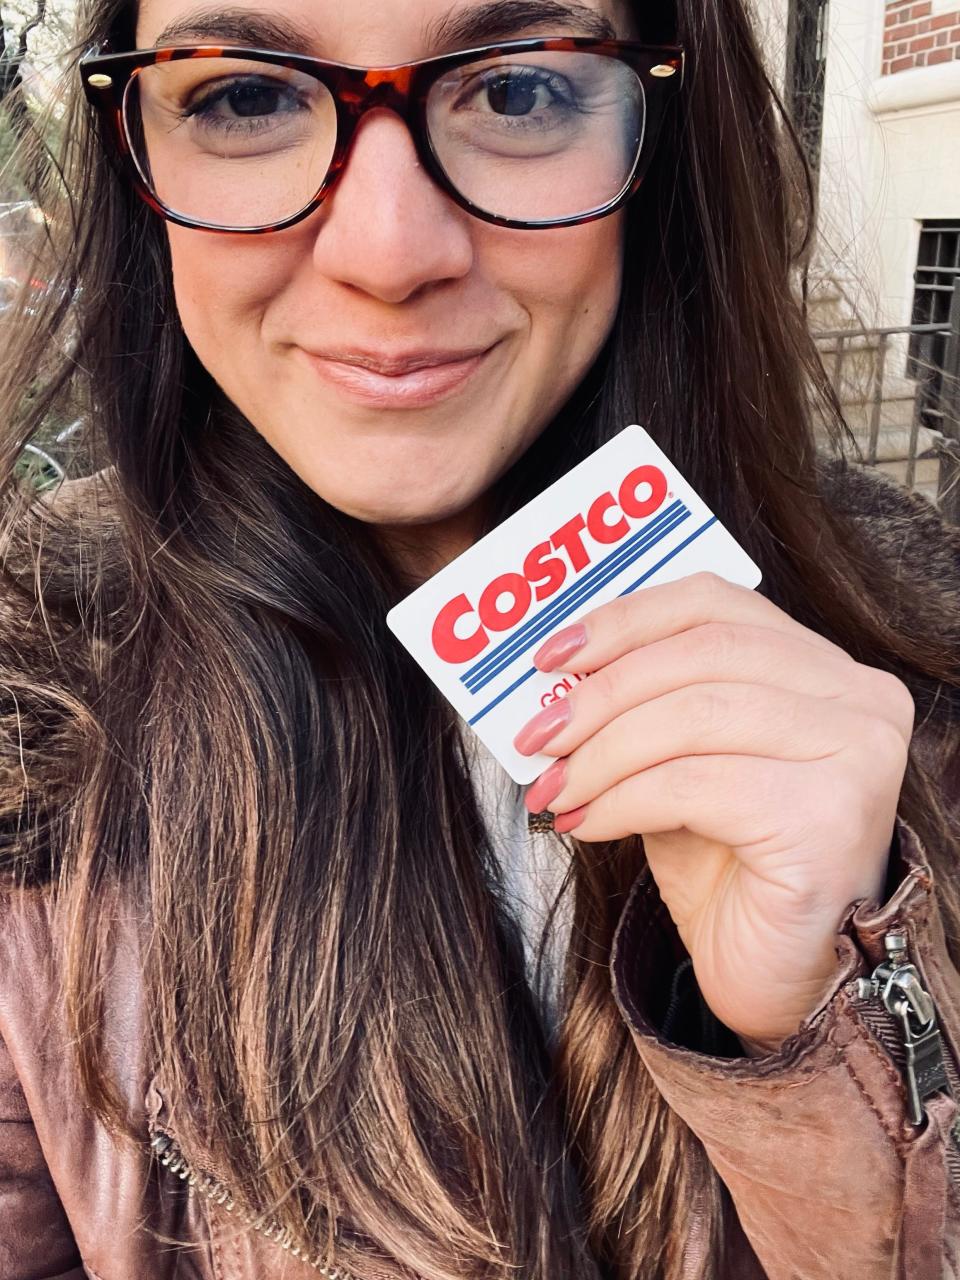 The writer with her Costco card